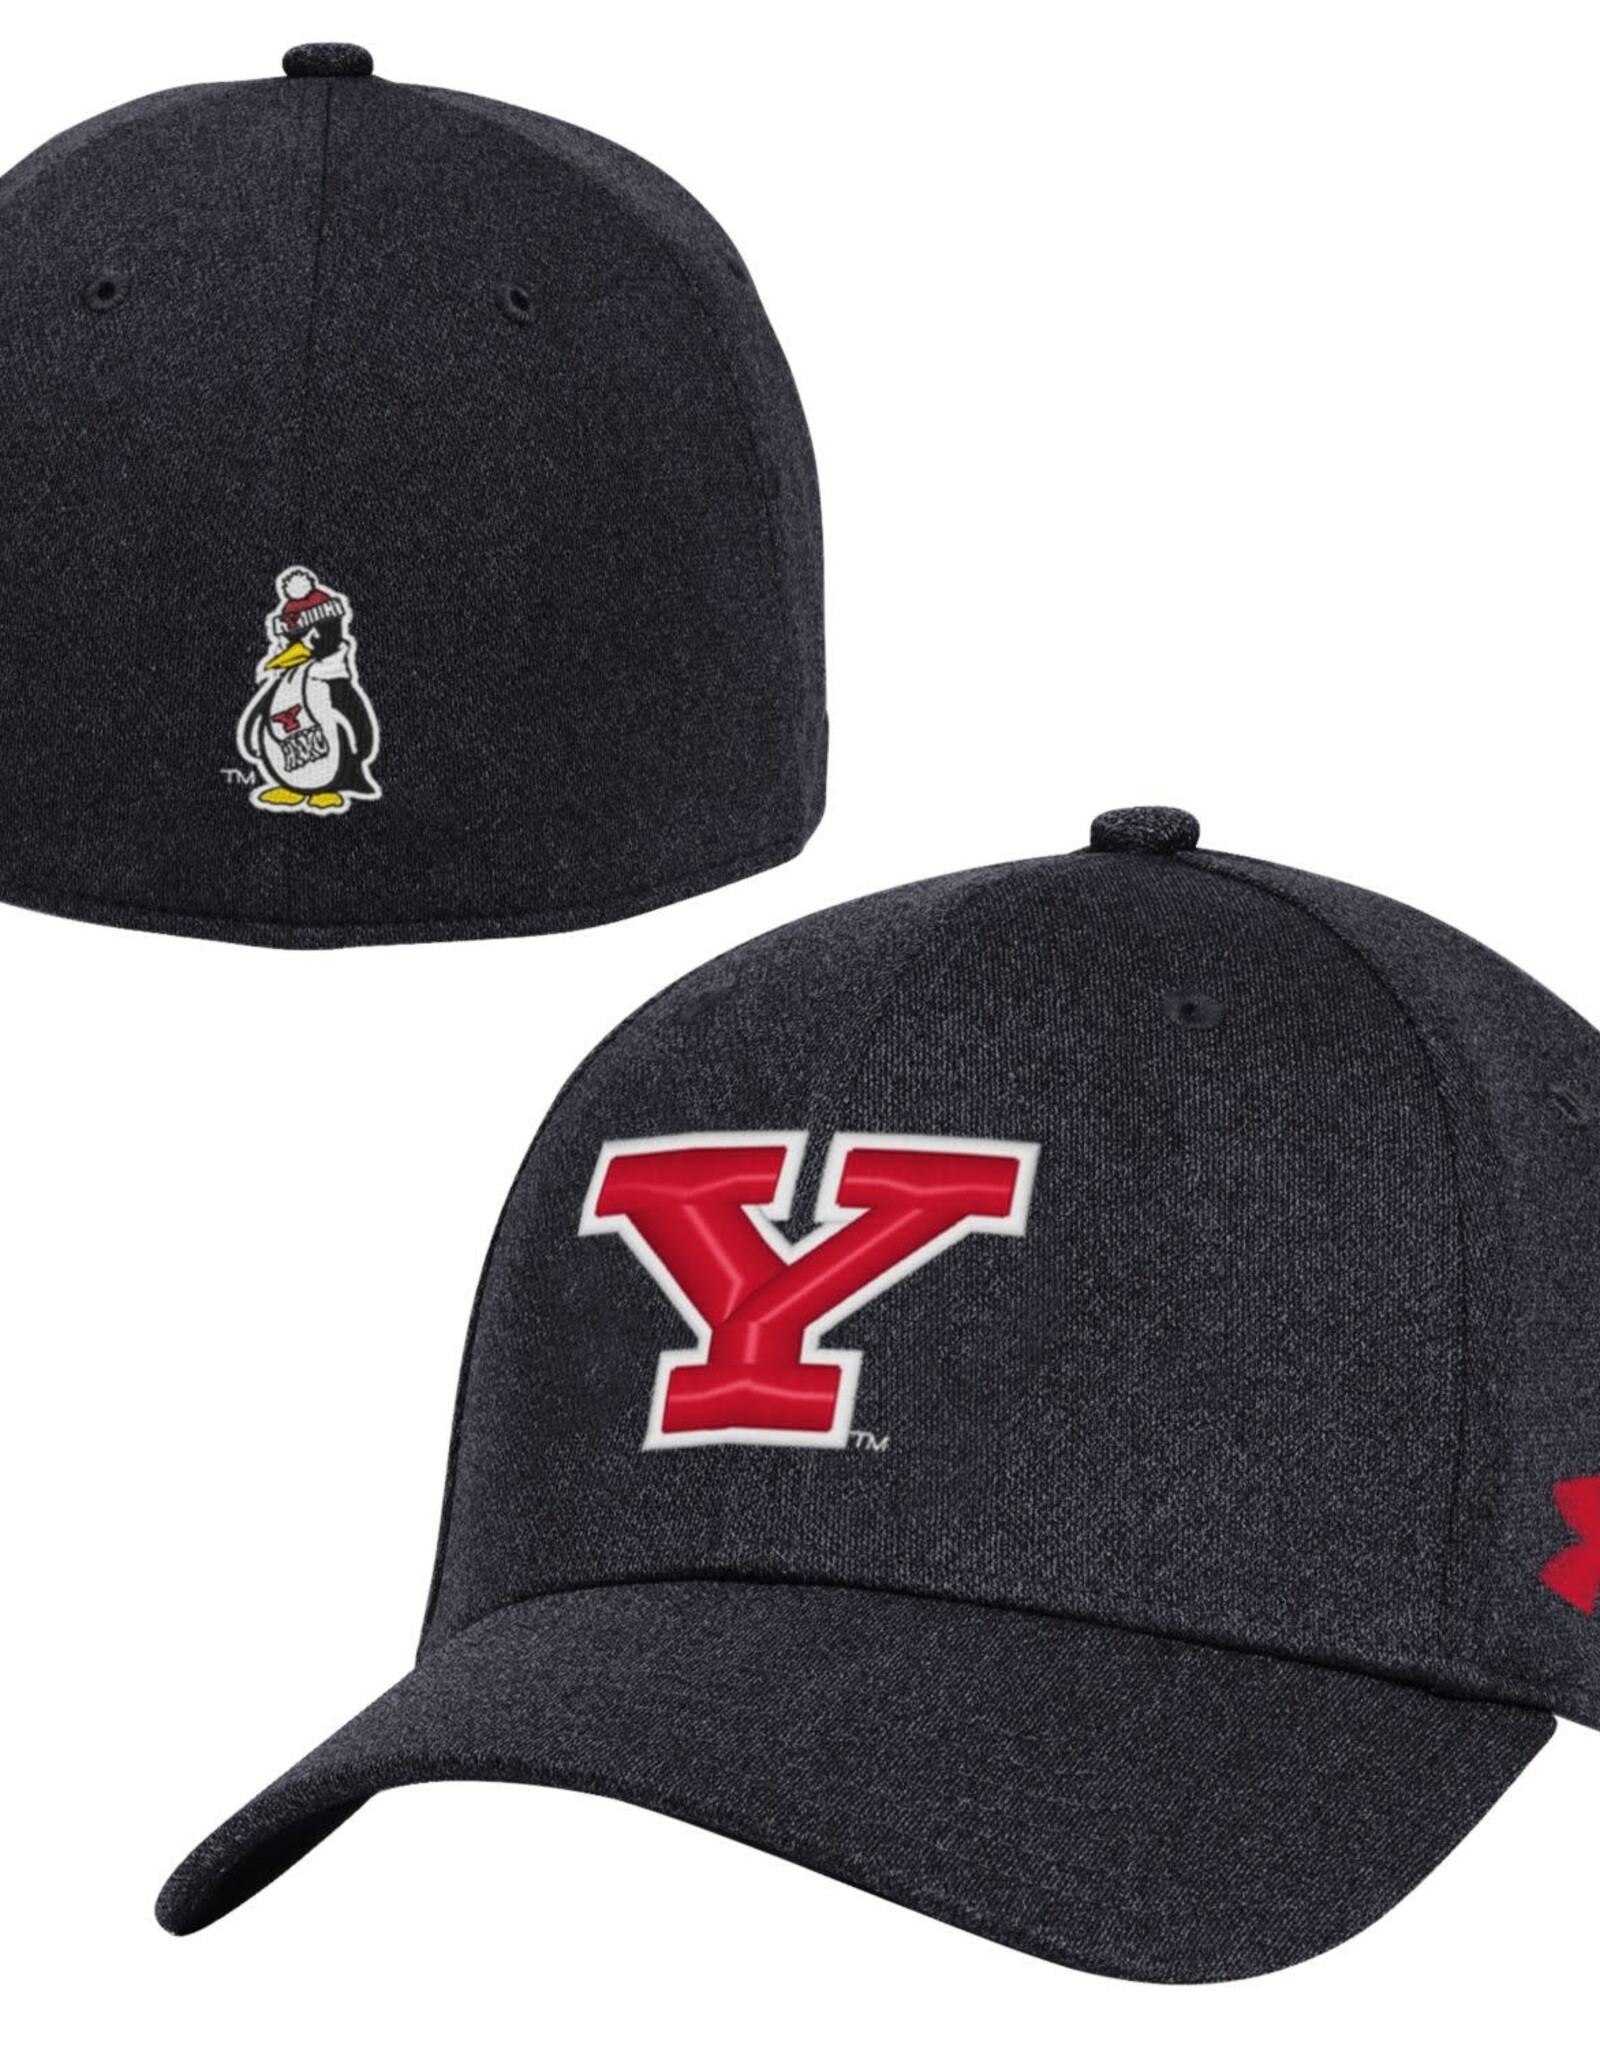 Under Armour Youngstown State Penguins Black Blitzing Stretch Fit Cap - Red Y Logo / Pete Back